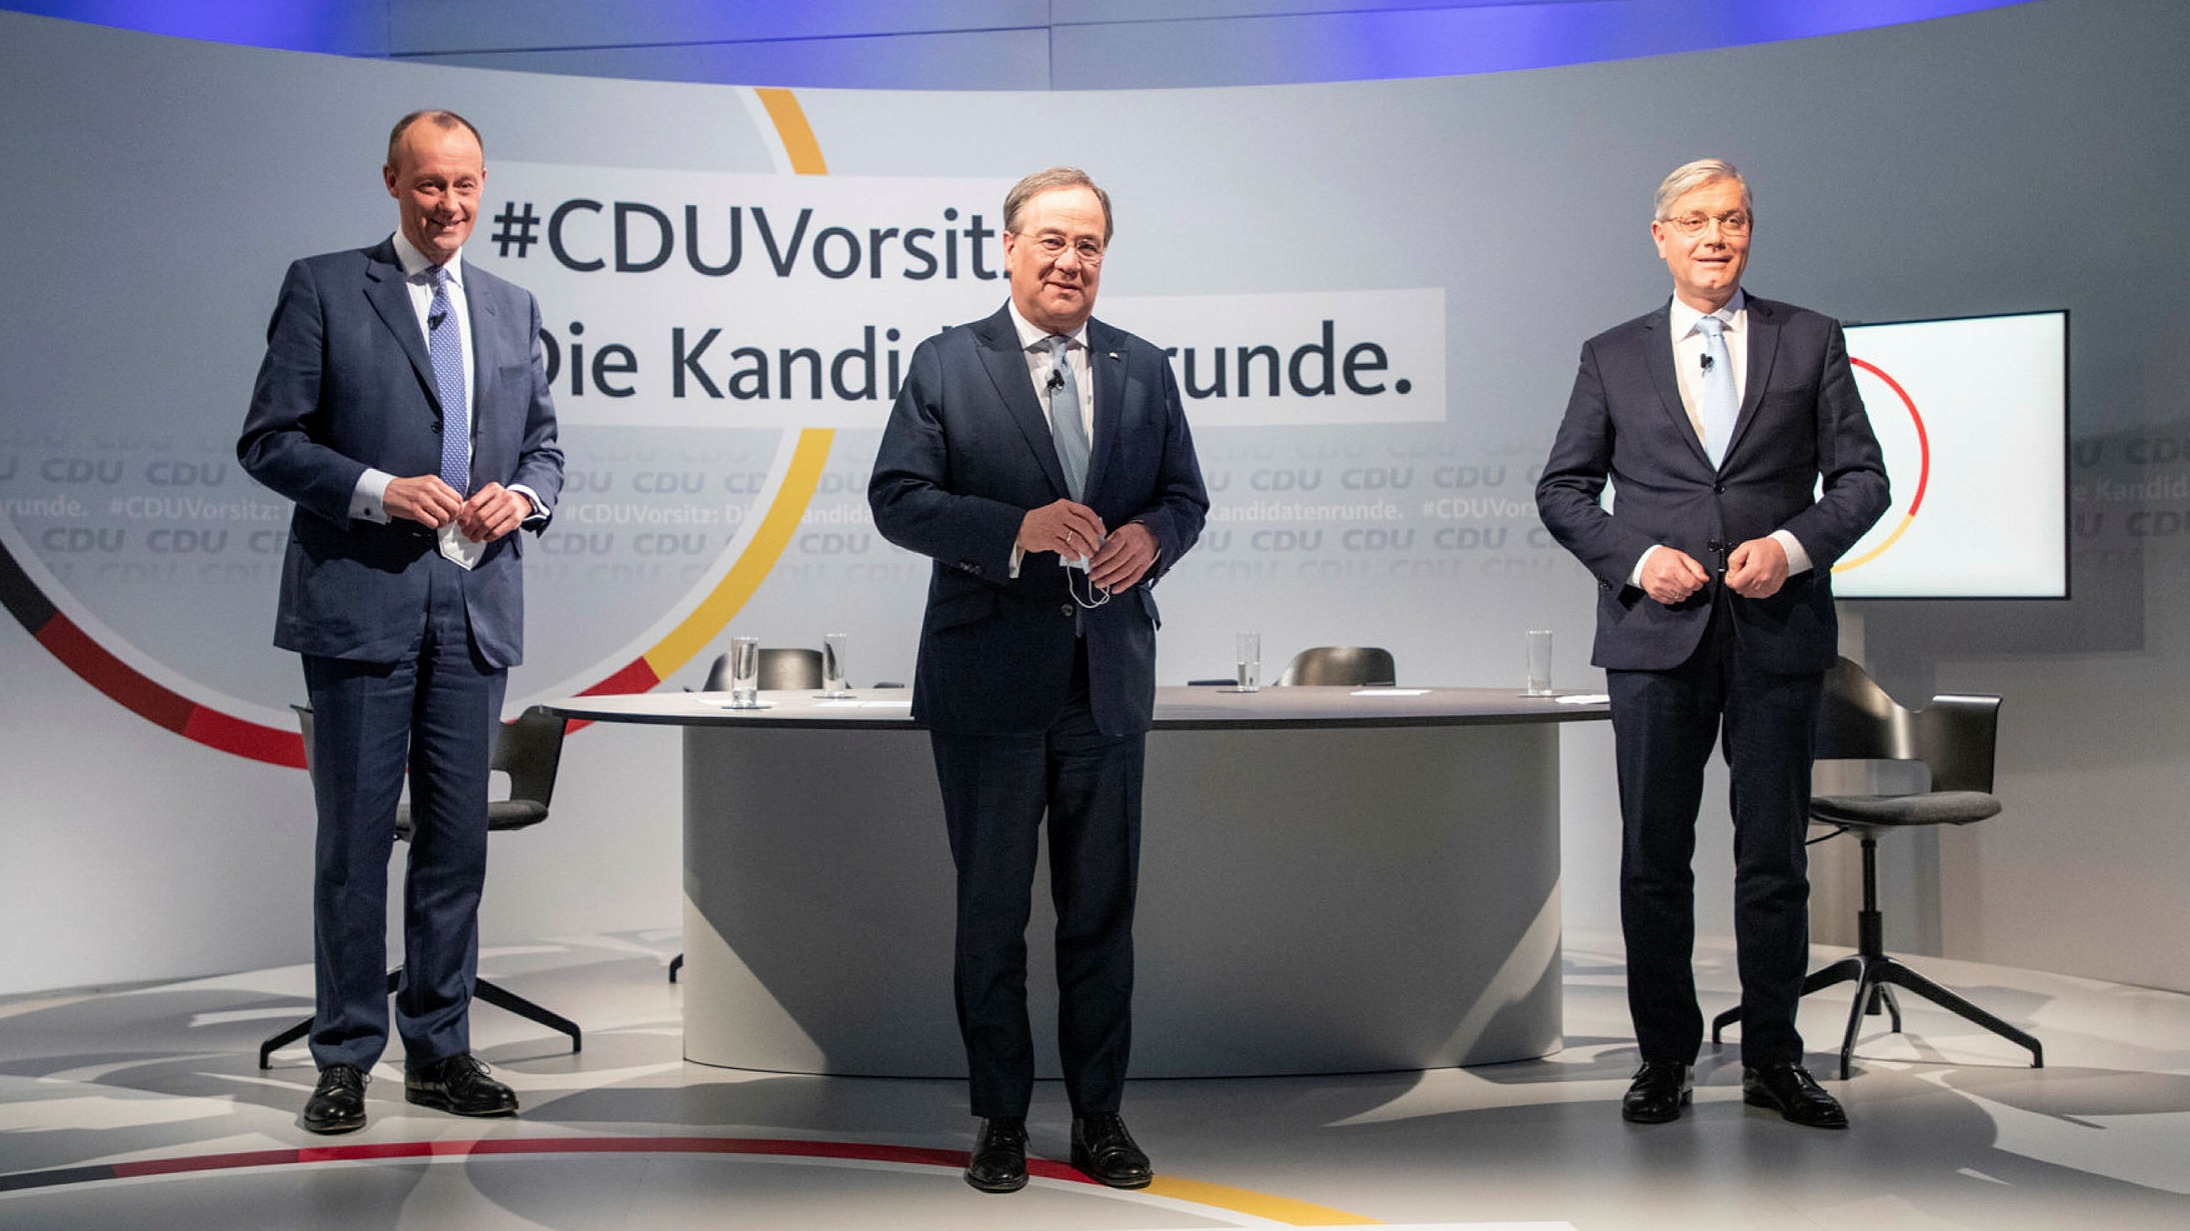 Shift in Europe policy likely as Germany's CDU elects new leader |  Financial Times